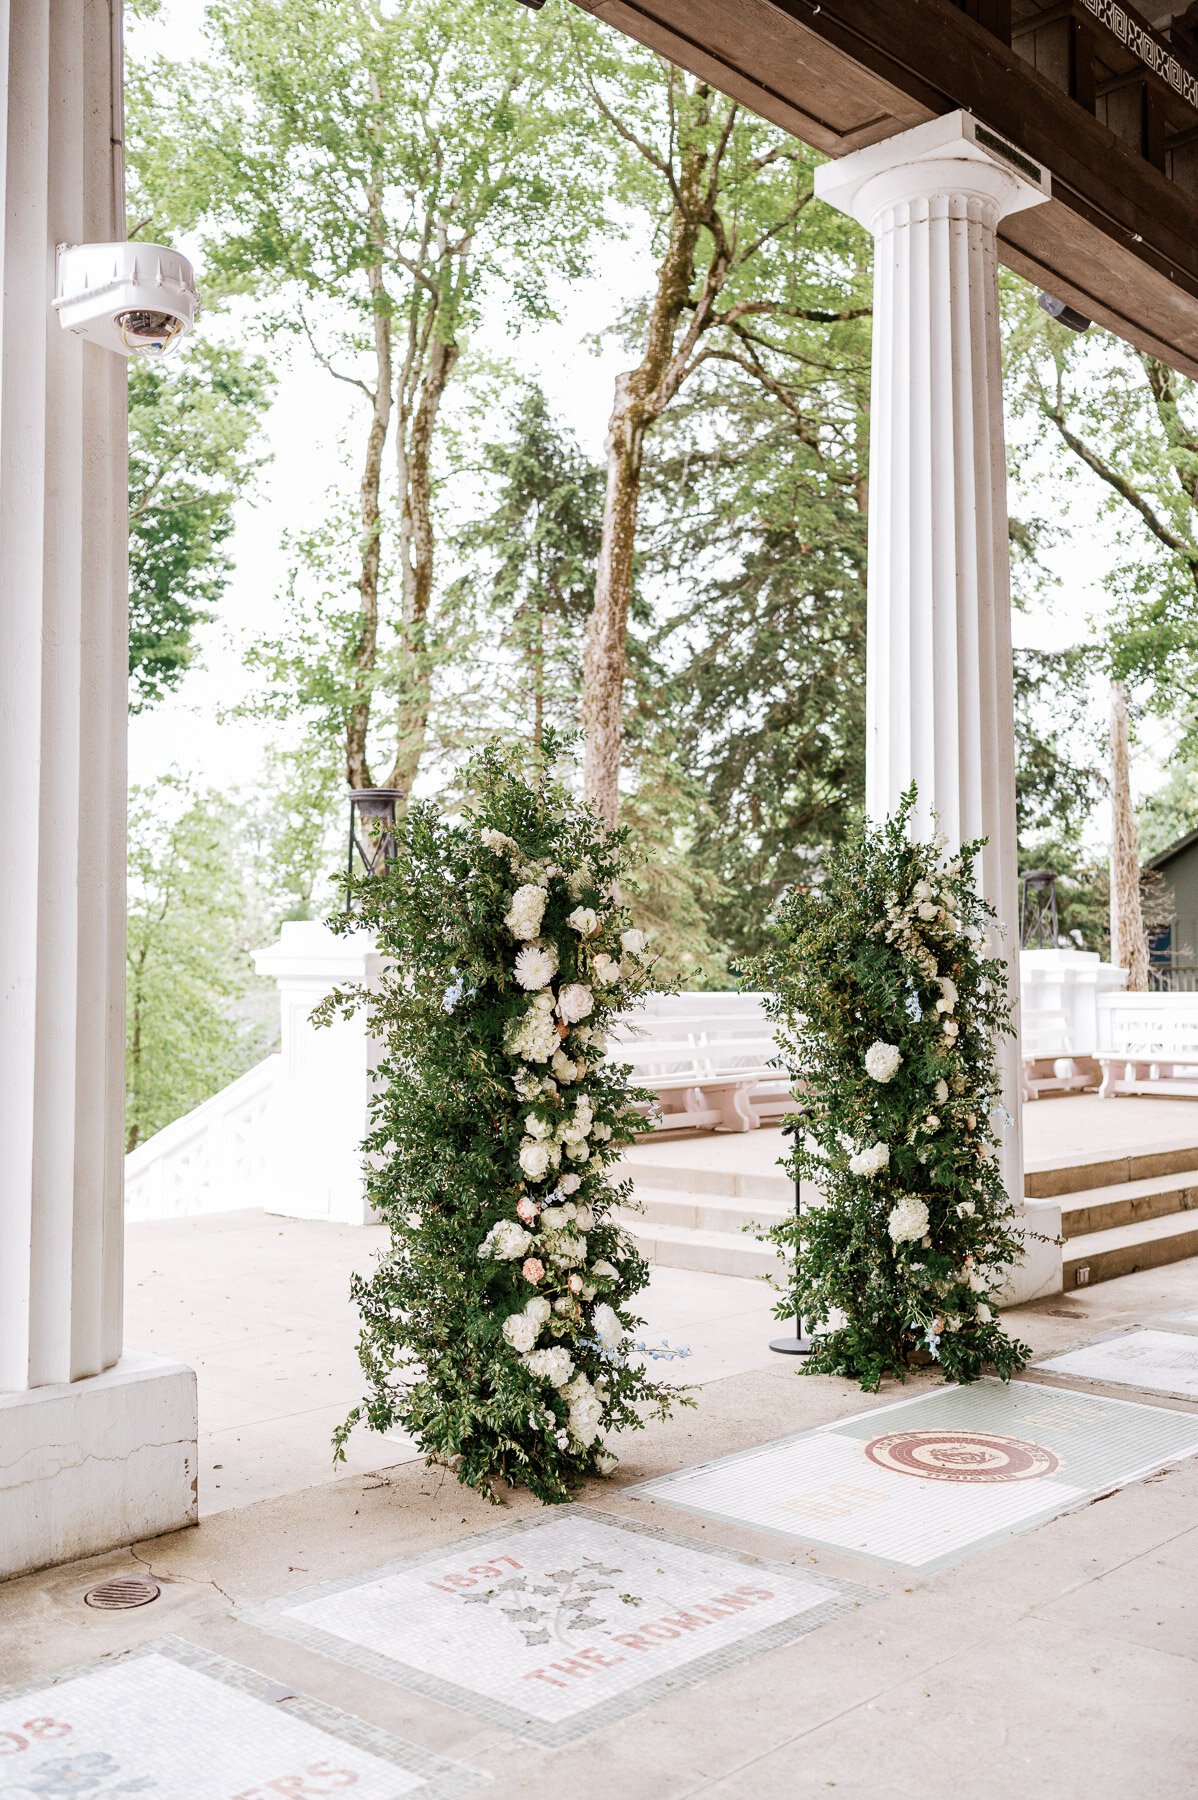 Chautauqua Institution Wedding in New York with EVL Events and Heirloom Soul Floral Design Hall of Philosophy Ceremony